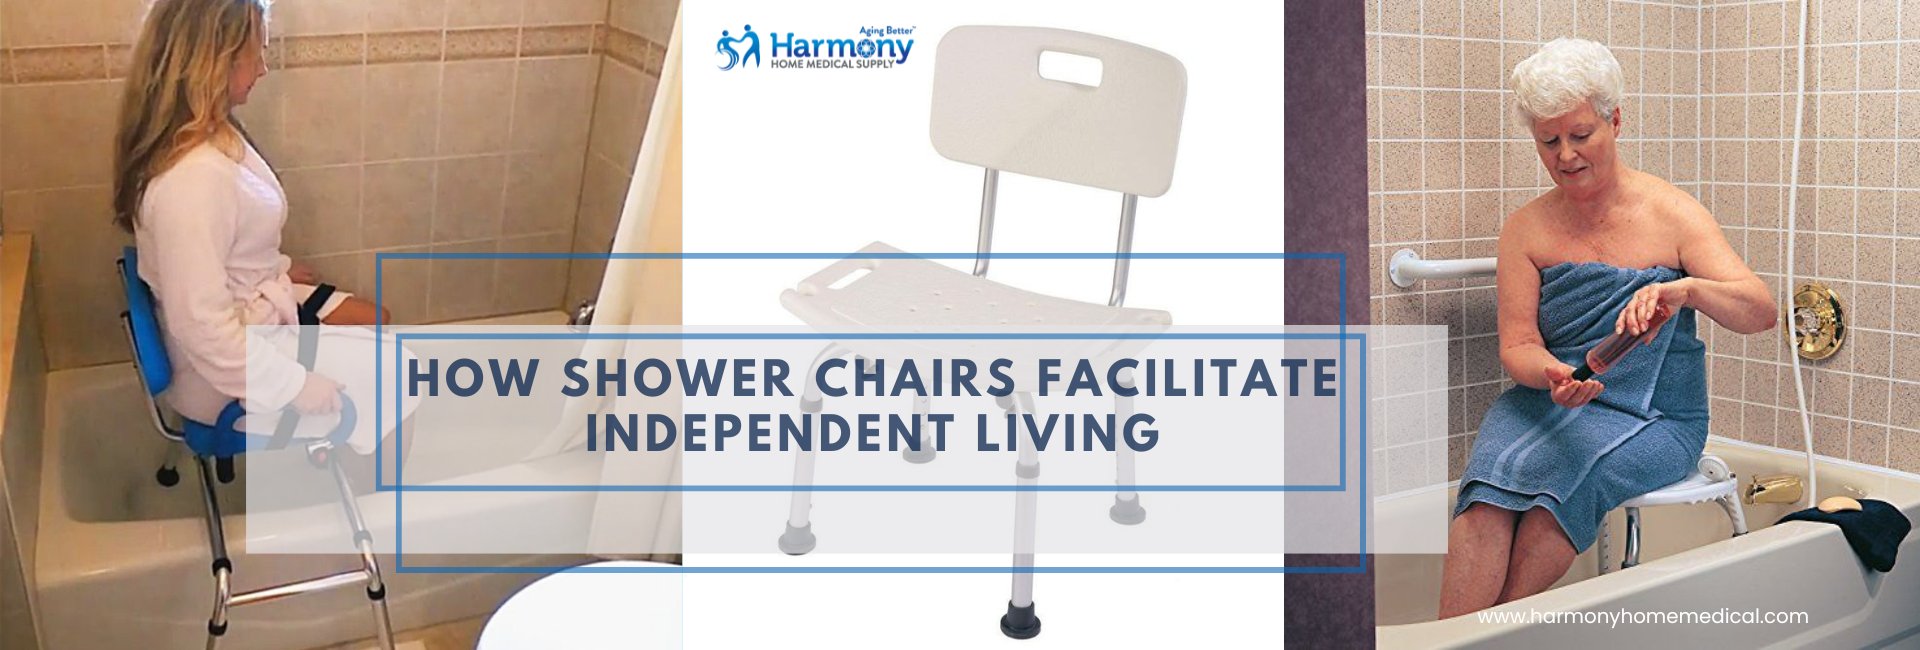 How Shower Chairs Facilitate Independent Living